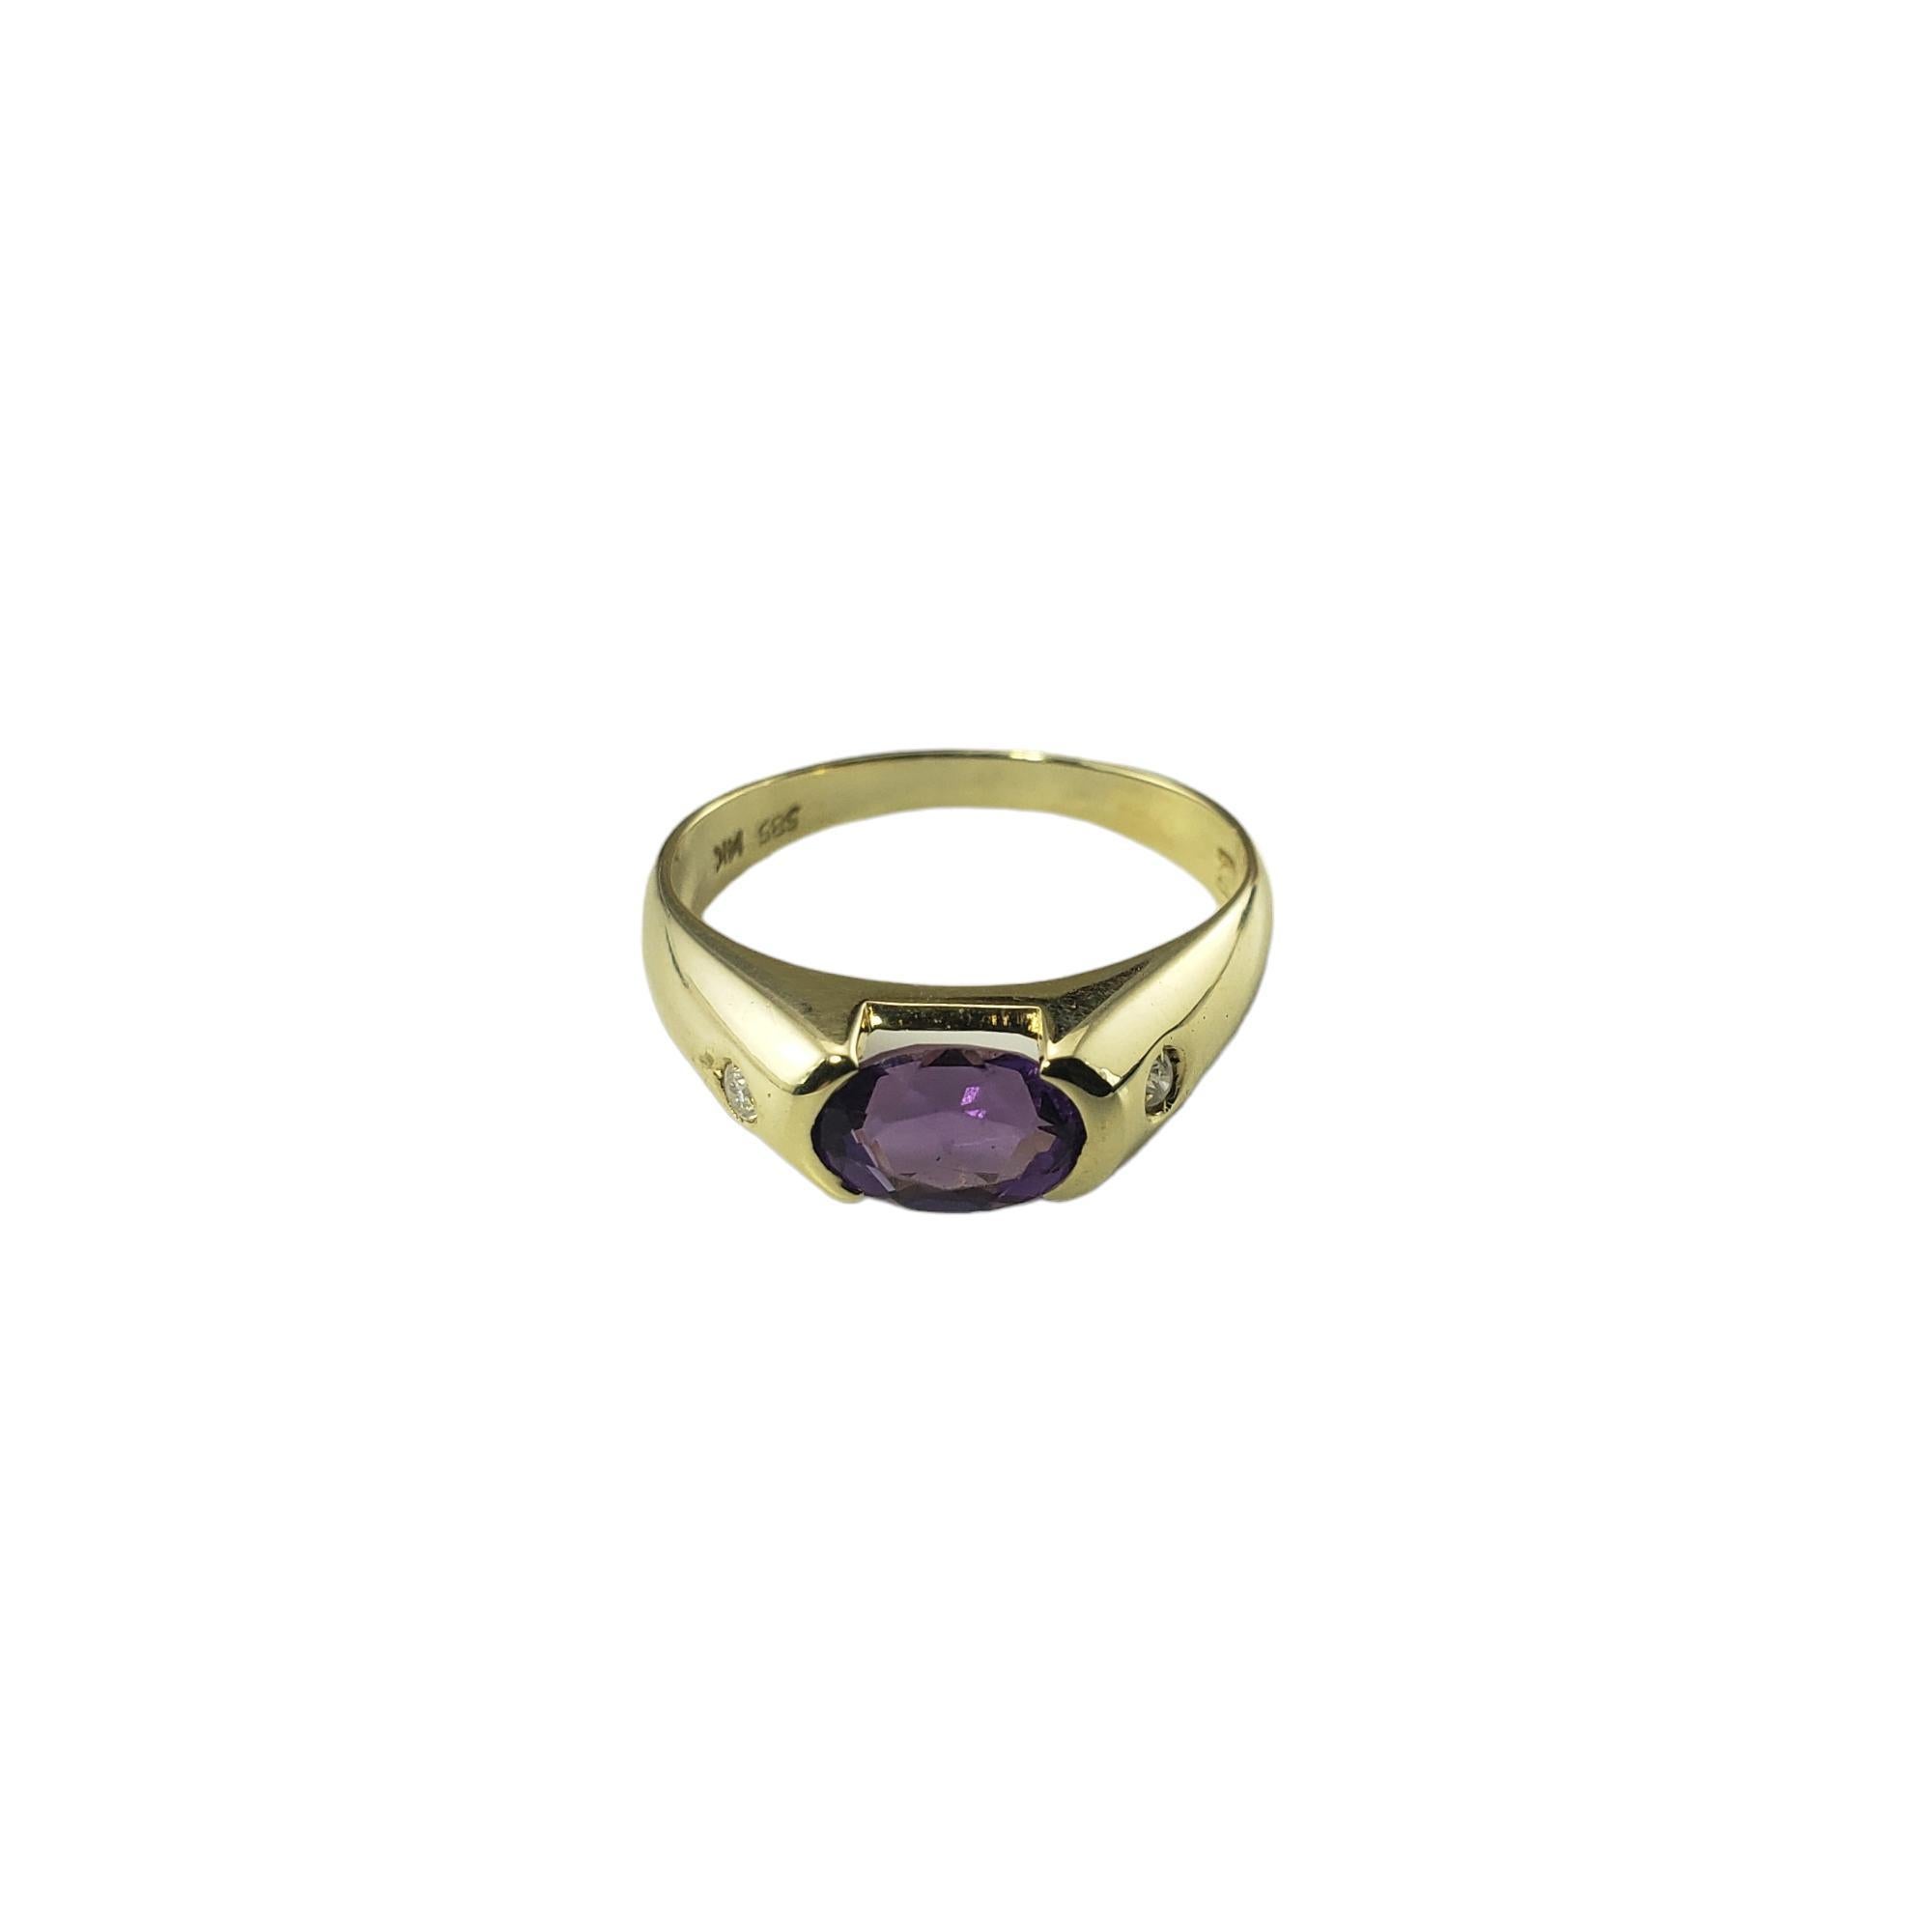 14 Karat Yellow Gold Amethyst and Diamond Ring Size 6-

This lovely ring features one oval amethyst stone (7 mm x 5 mm) and two round brilliant cut diamonds set in classic 14K yellow gold.  Shank: 2.1 mm.

Approximate total diamond weight:   .04